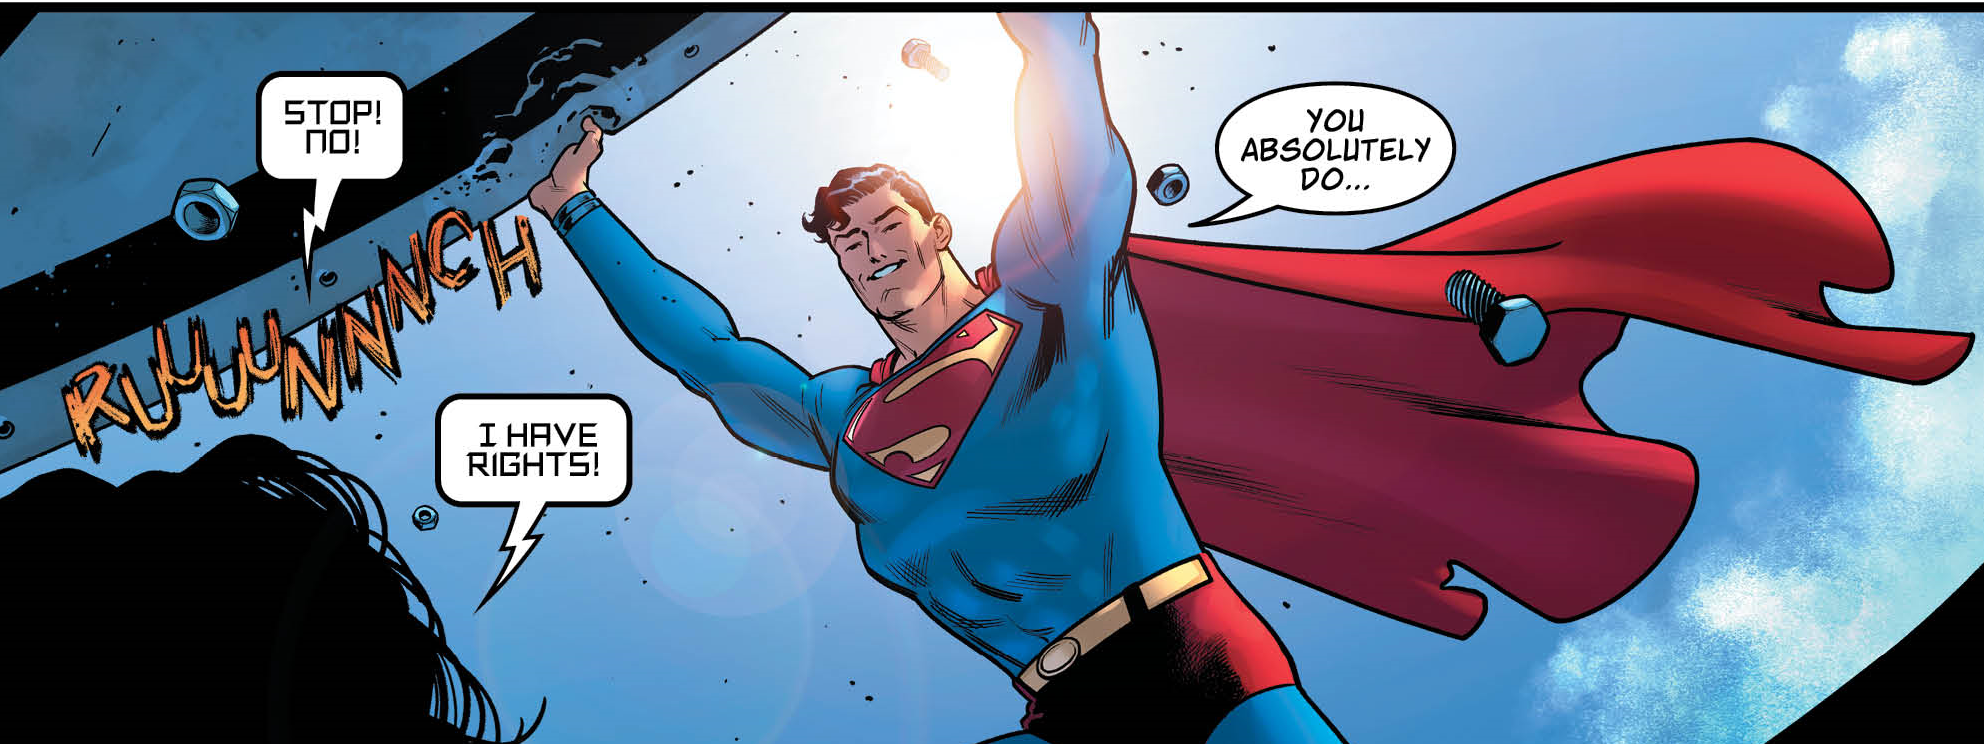 Man of Steel #2 Review